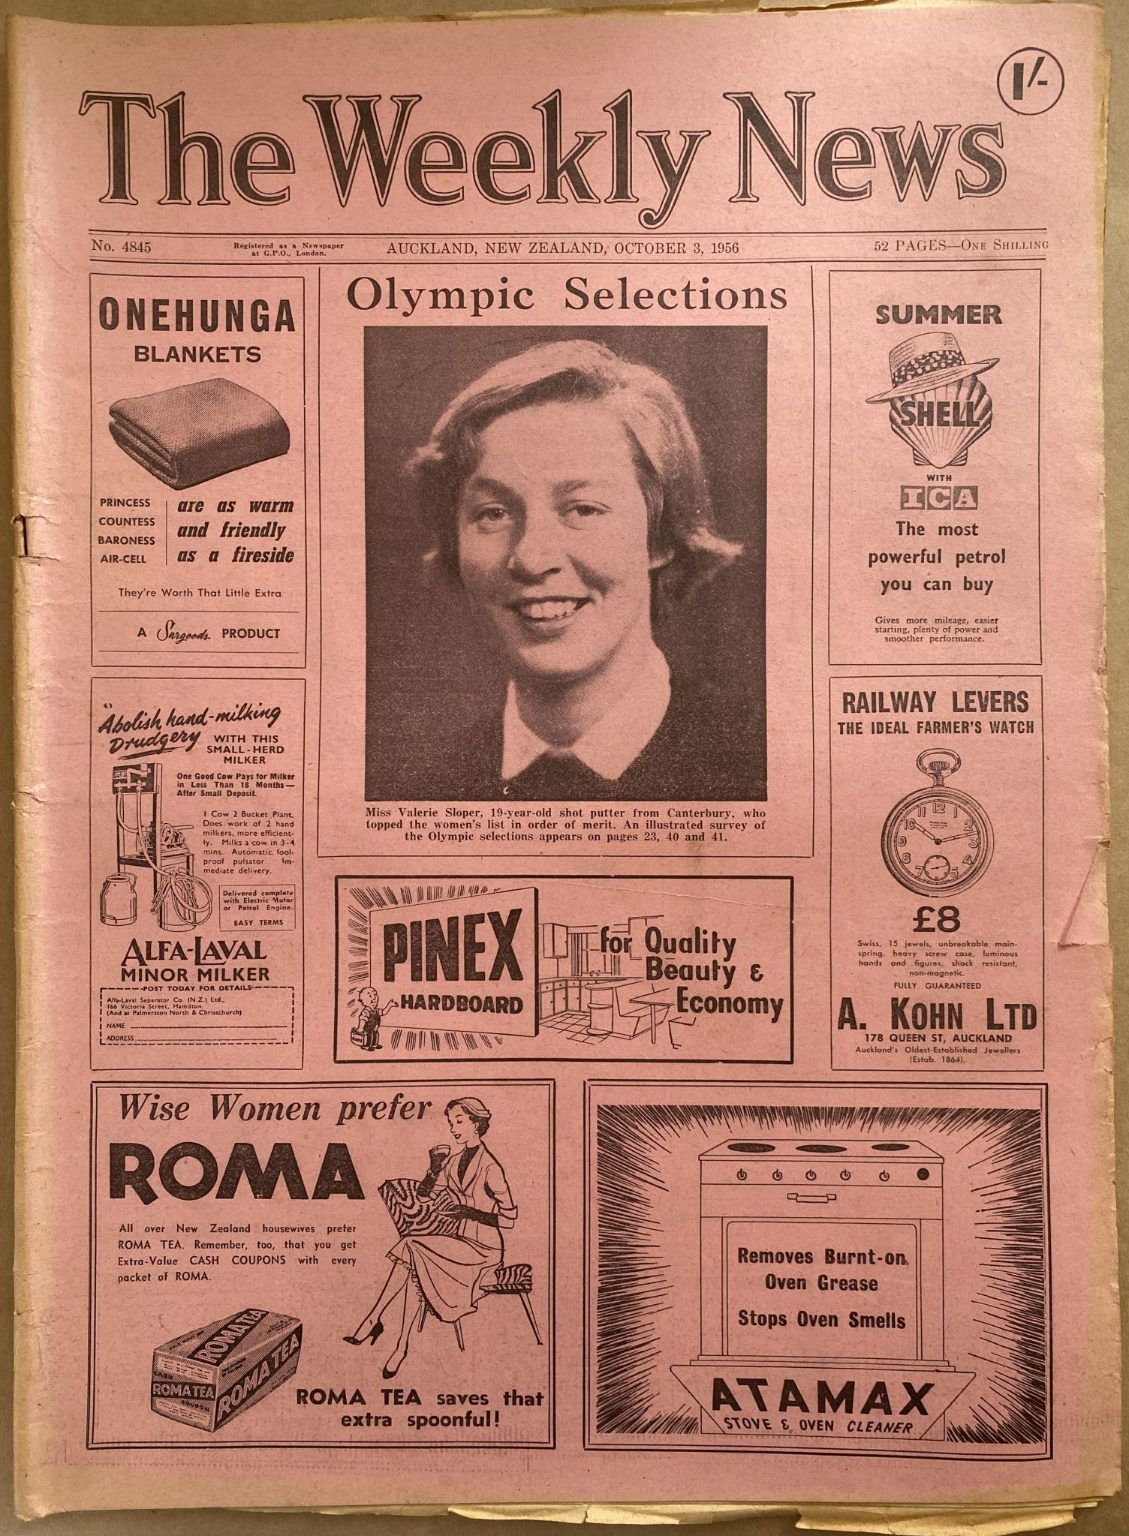 OLD NEWSPAPER: The Weekly News - No. 4845, 3 October 1956